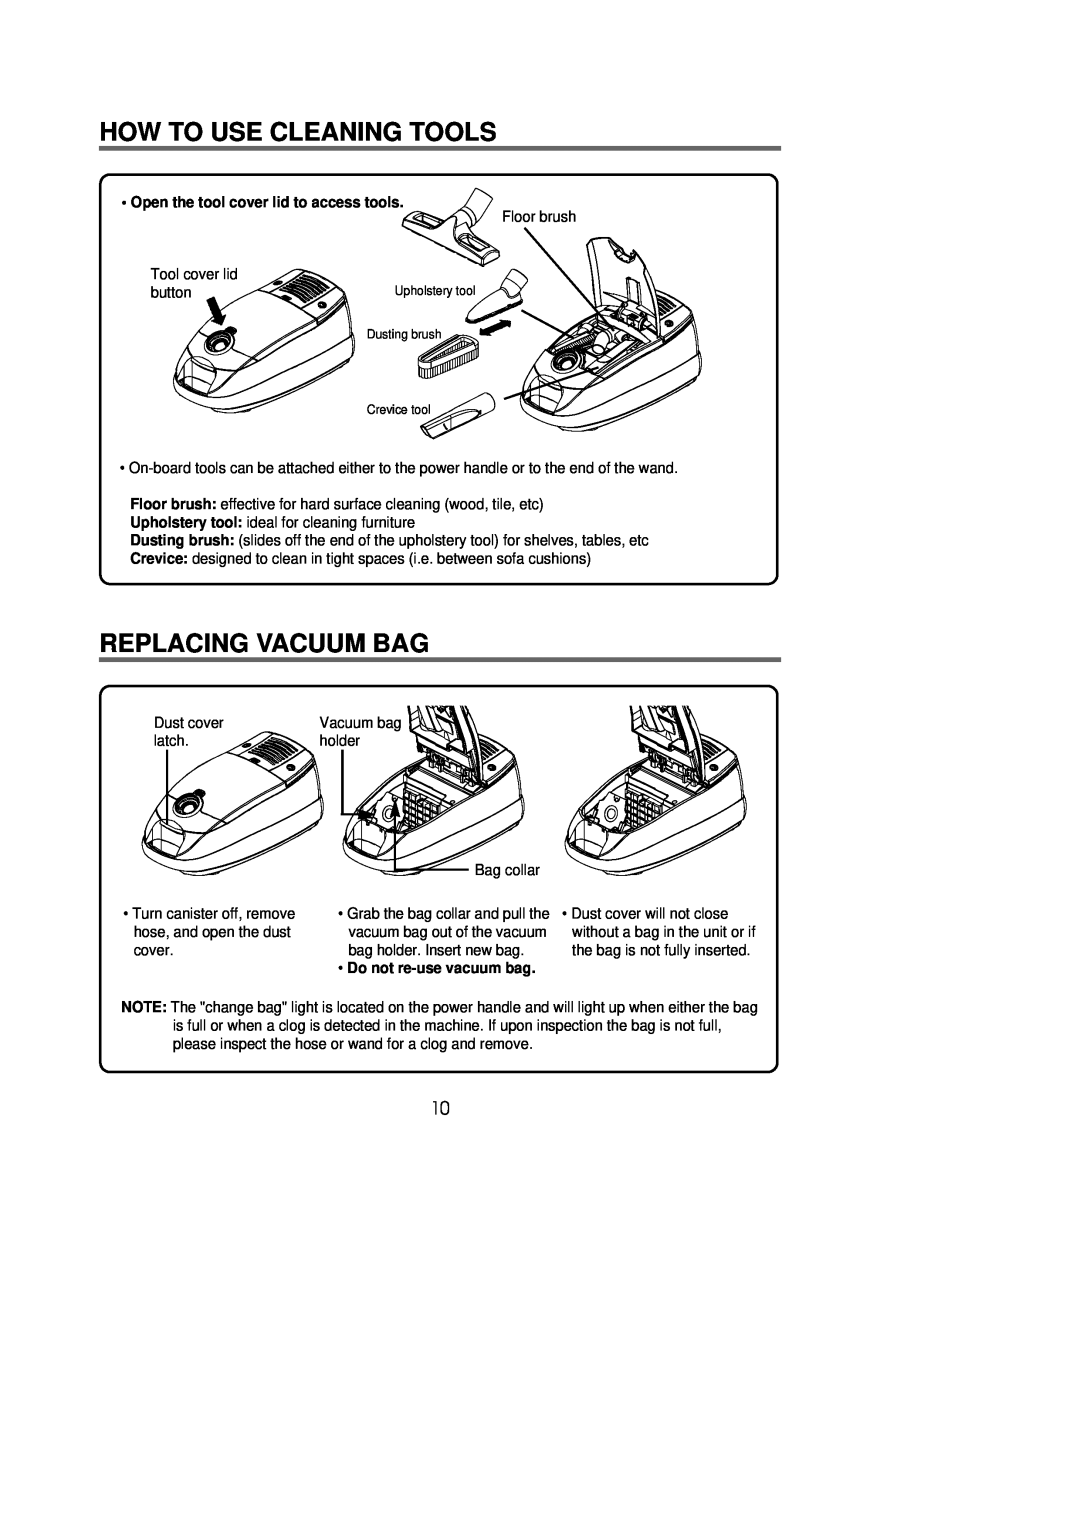 Riccar 1800 manual How To Use Cleaning Tools, Replacing Vacuum Bag, Open the tool cover lid to access tools 